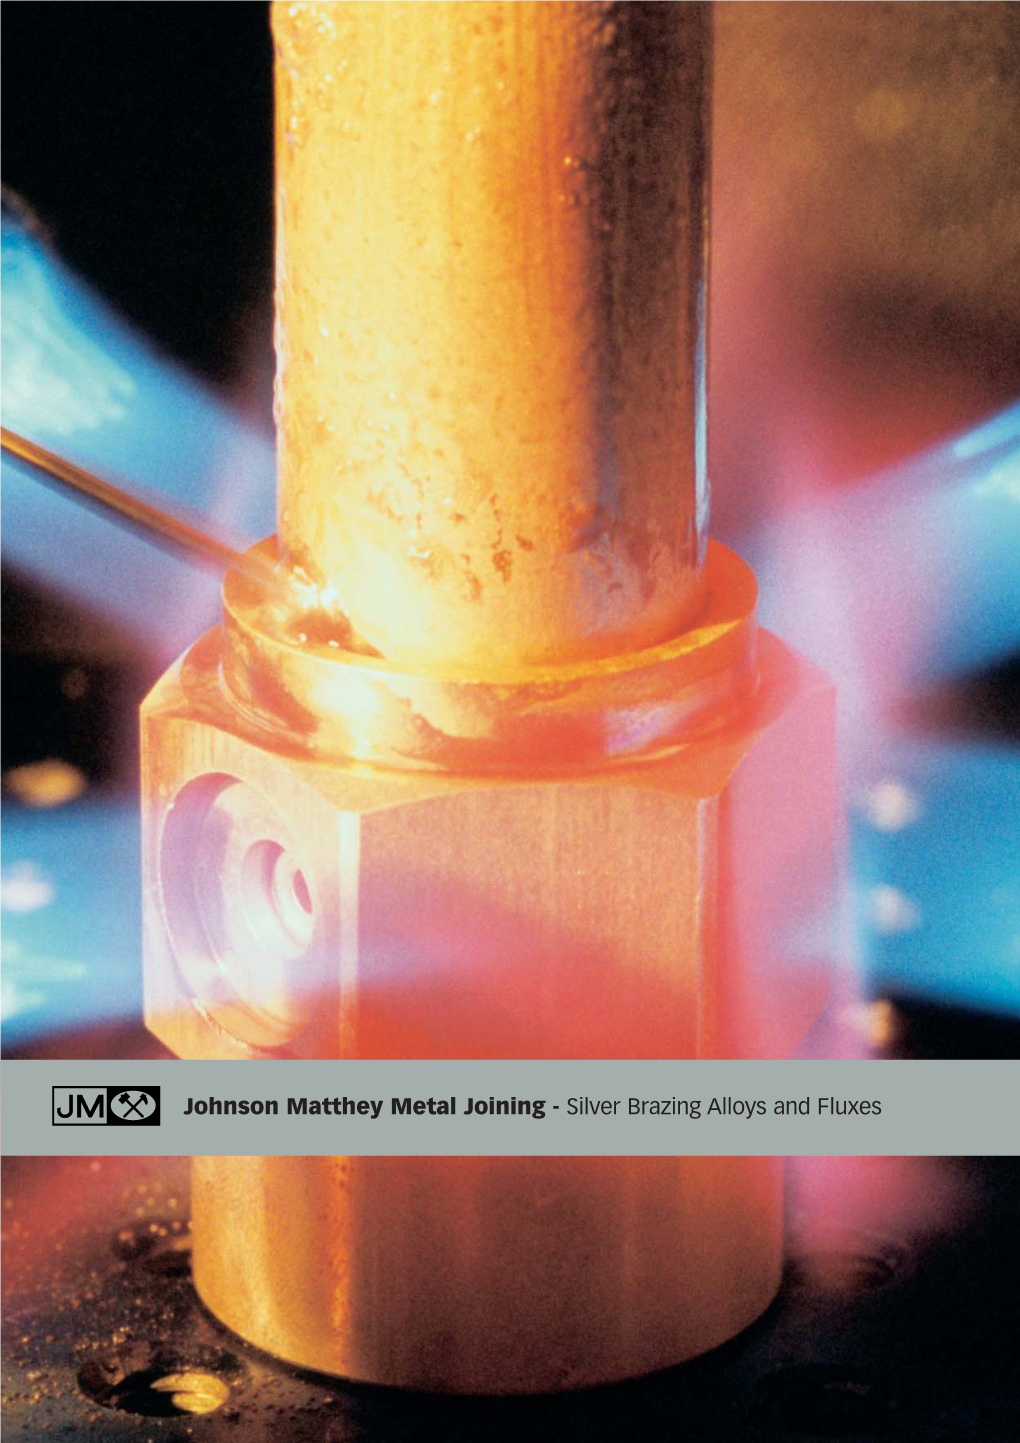 Johnson Matthey Metal Joining - Silver Brazing Alloys and Fluxes